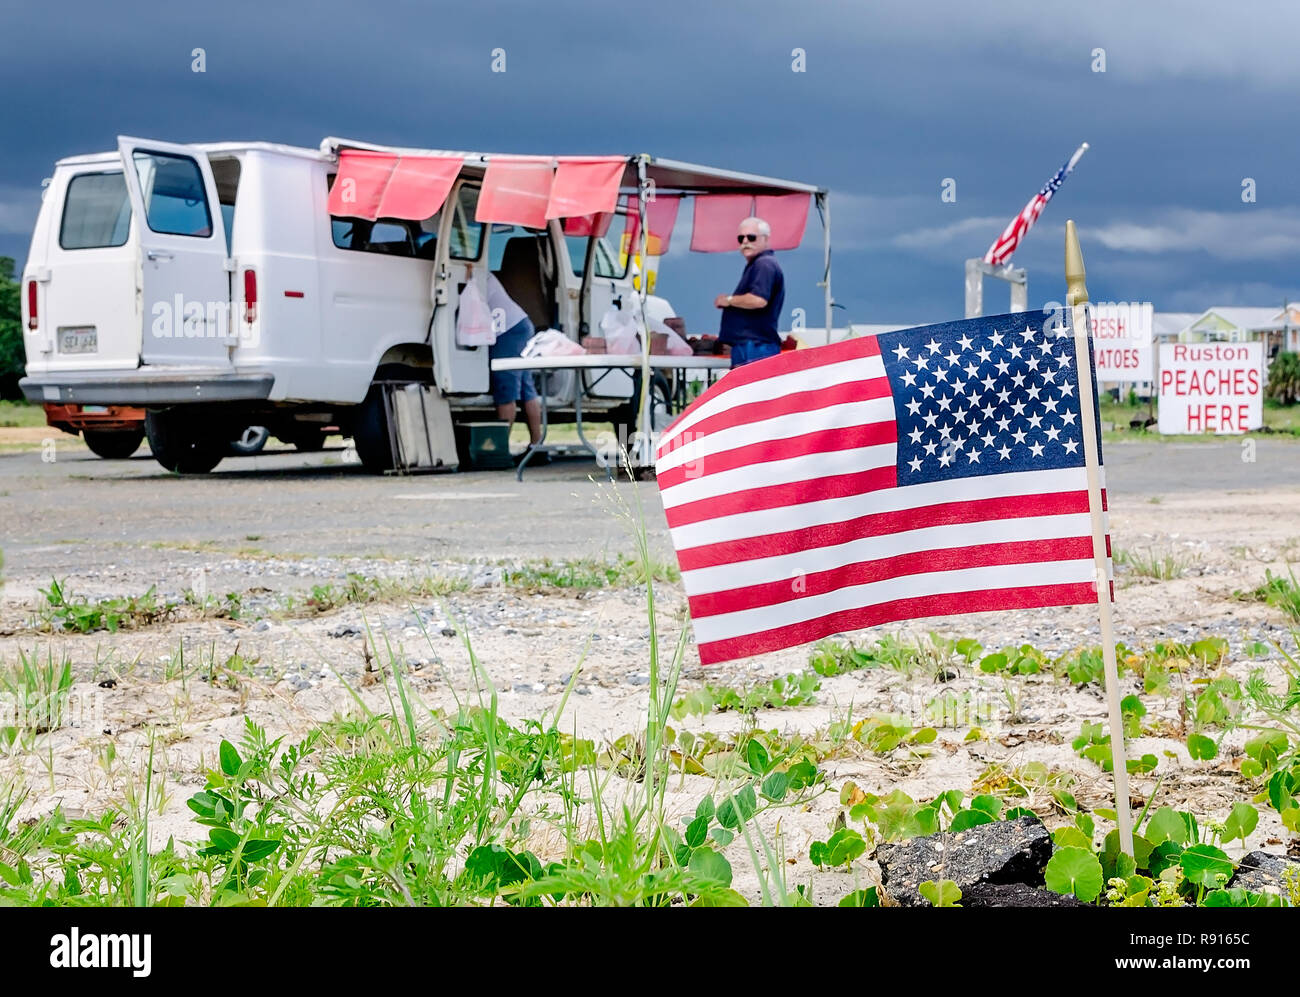 American flags fly at Paul Verzwyvelt’s roadside fruit stand, June 12, 2018, in Pass Christian, Mississippi. Stock Photo